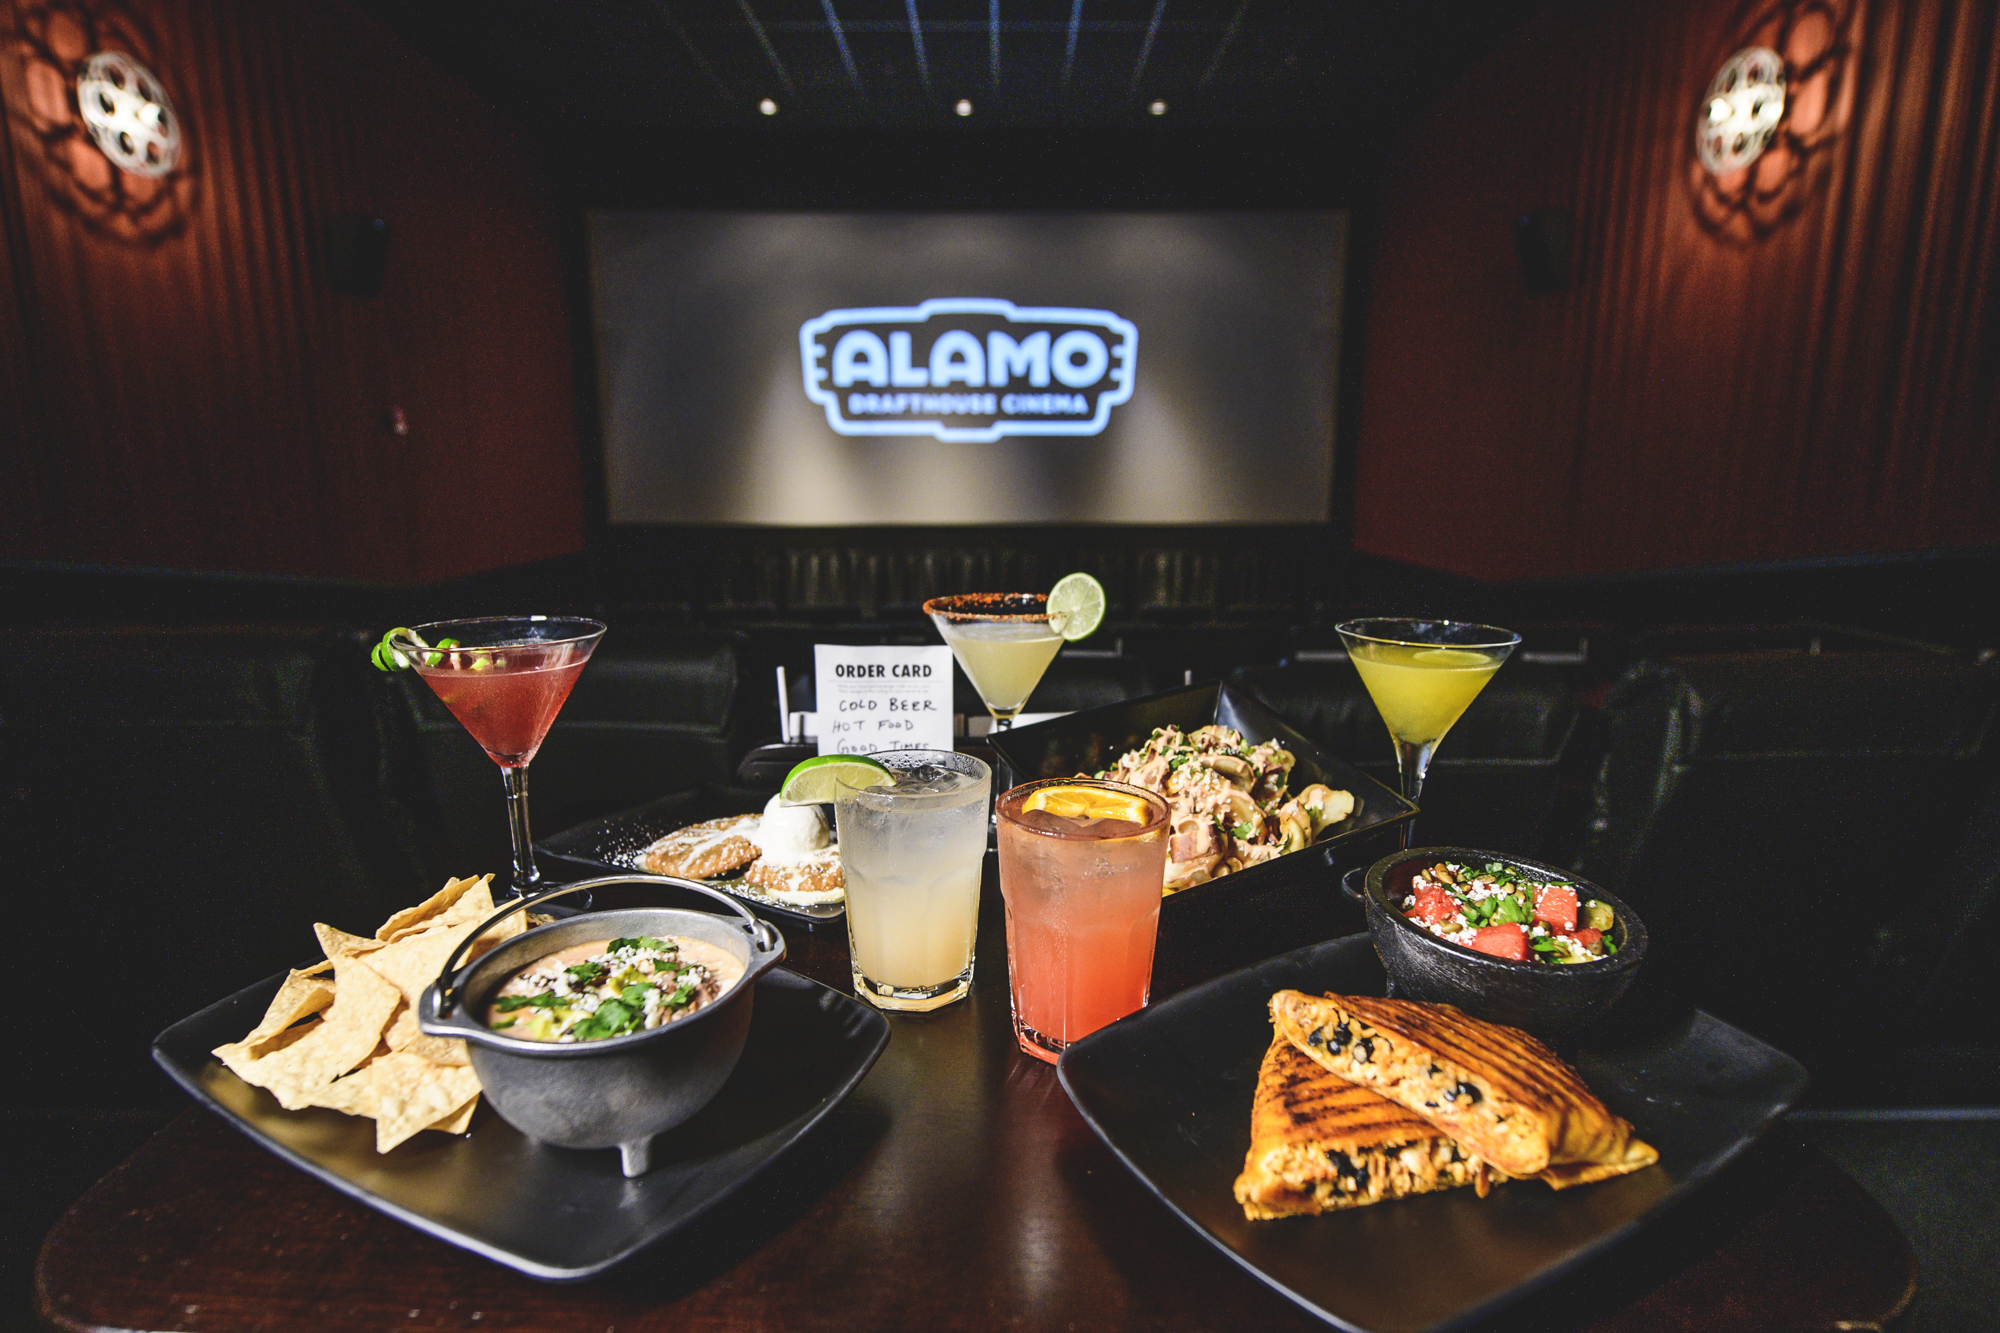 Dine In Movie Theater Options For Good Food And Films